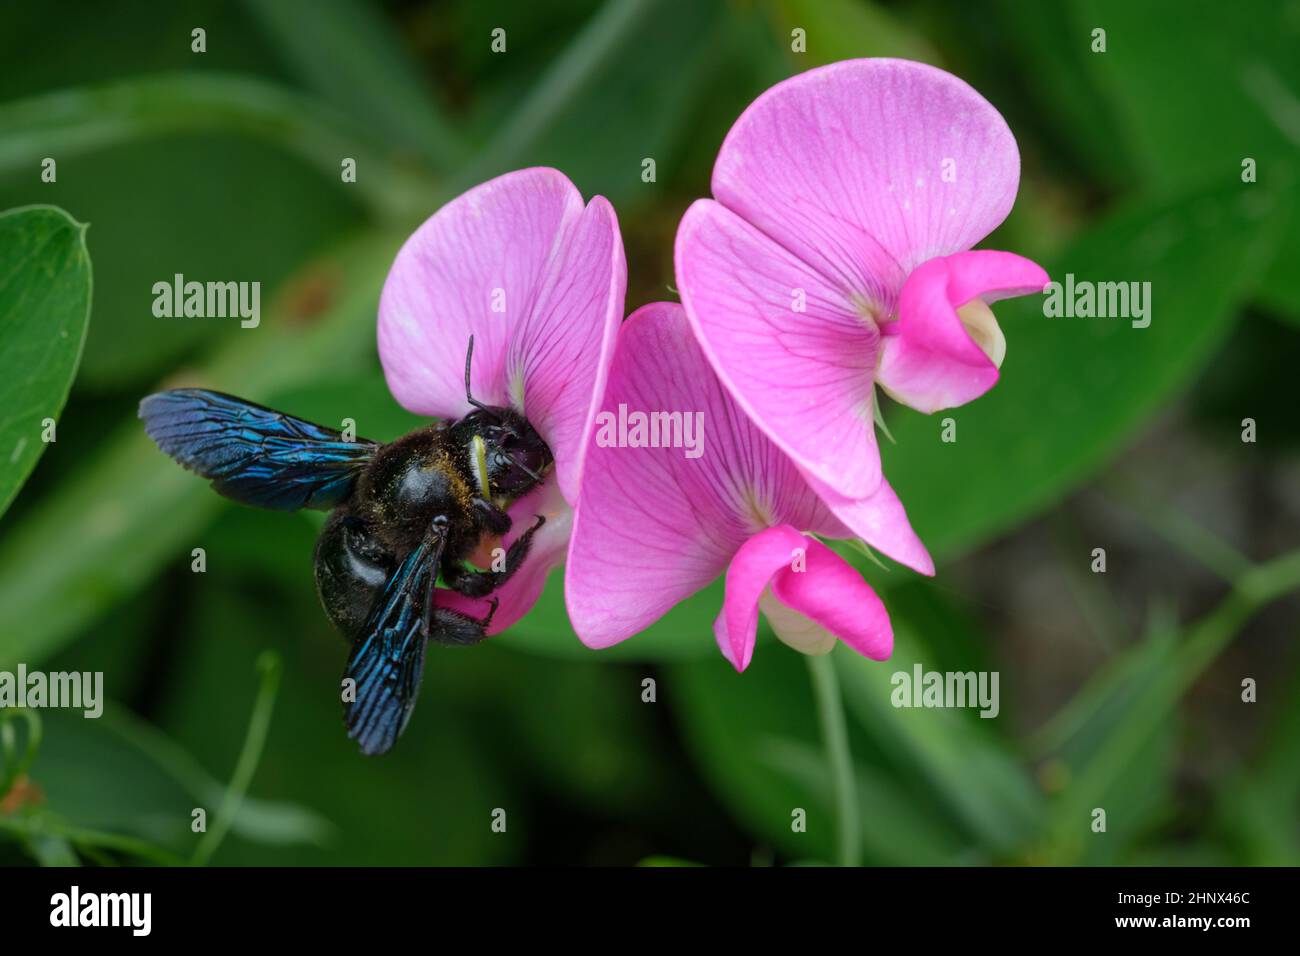 Blue carpenter bee (Xylocopa violacea) on pink flower close-up Stock Photo